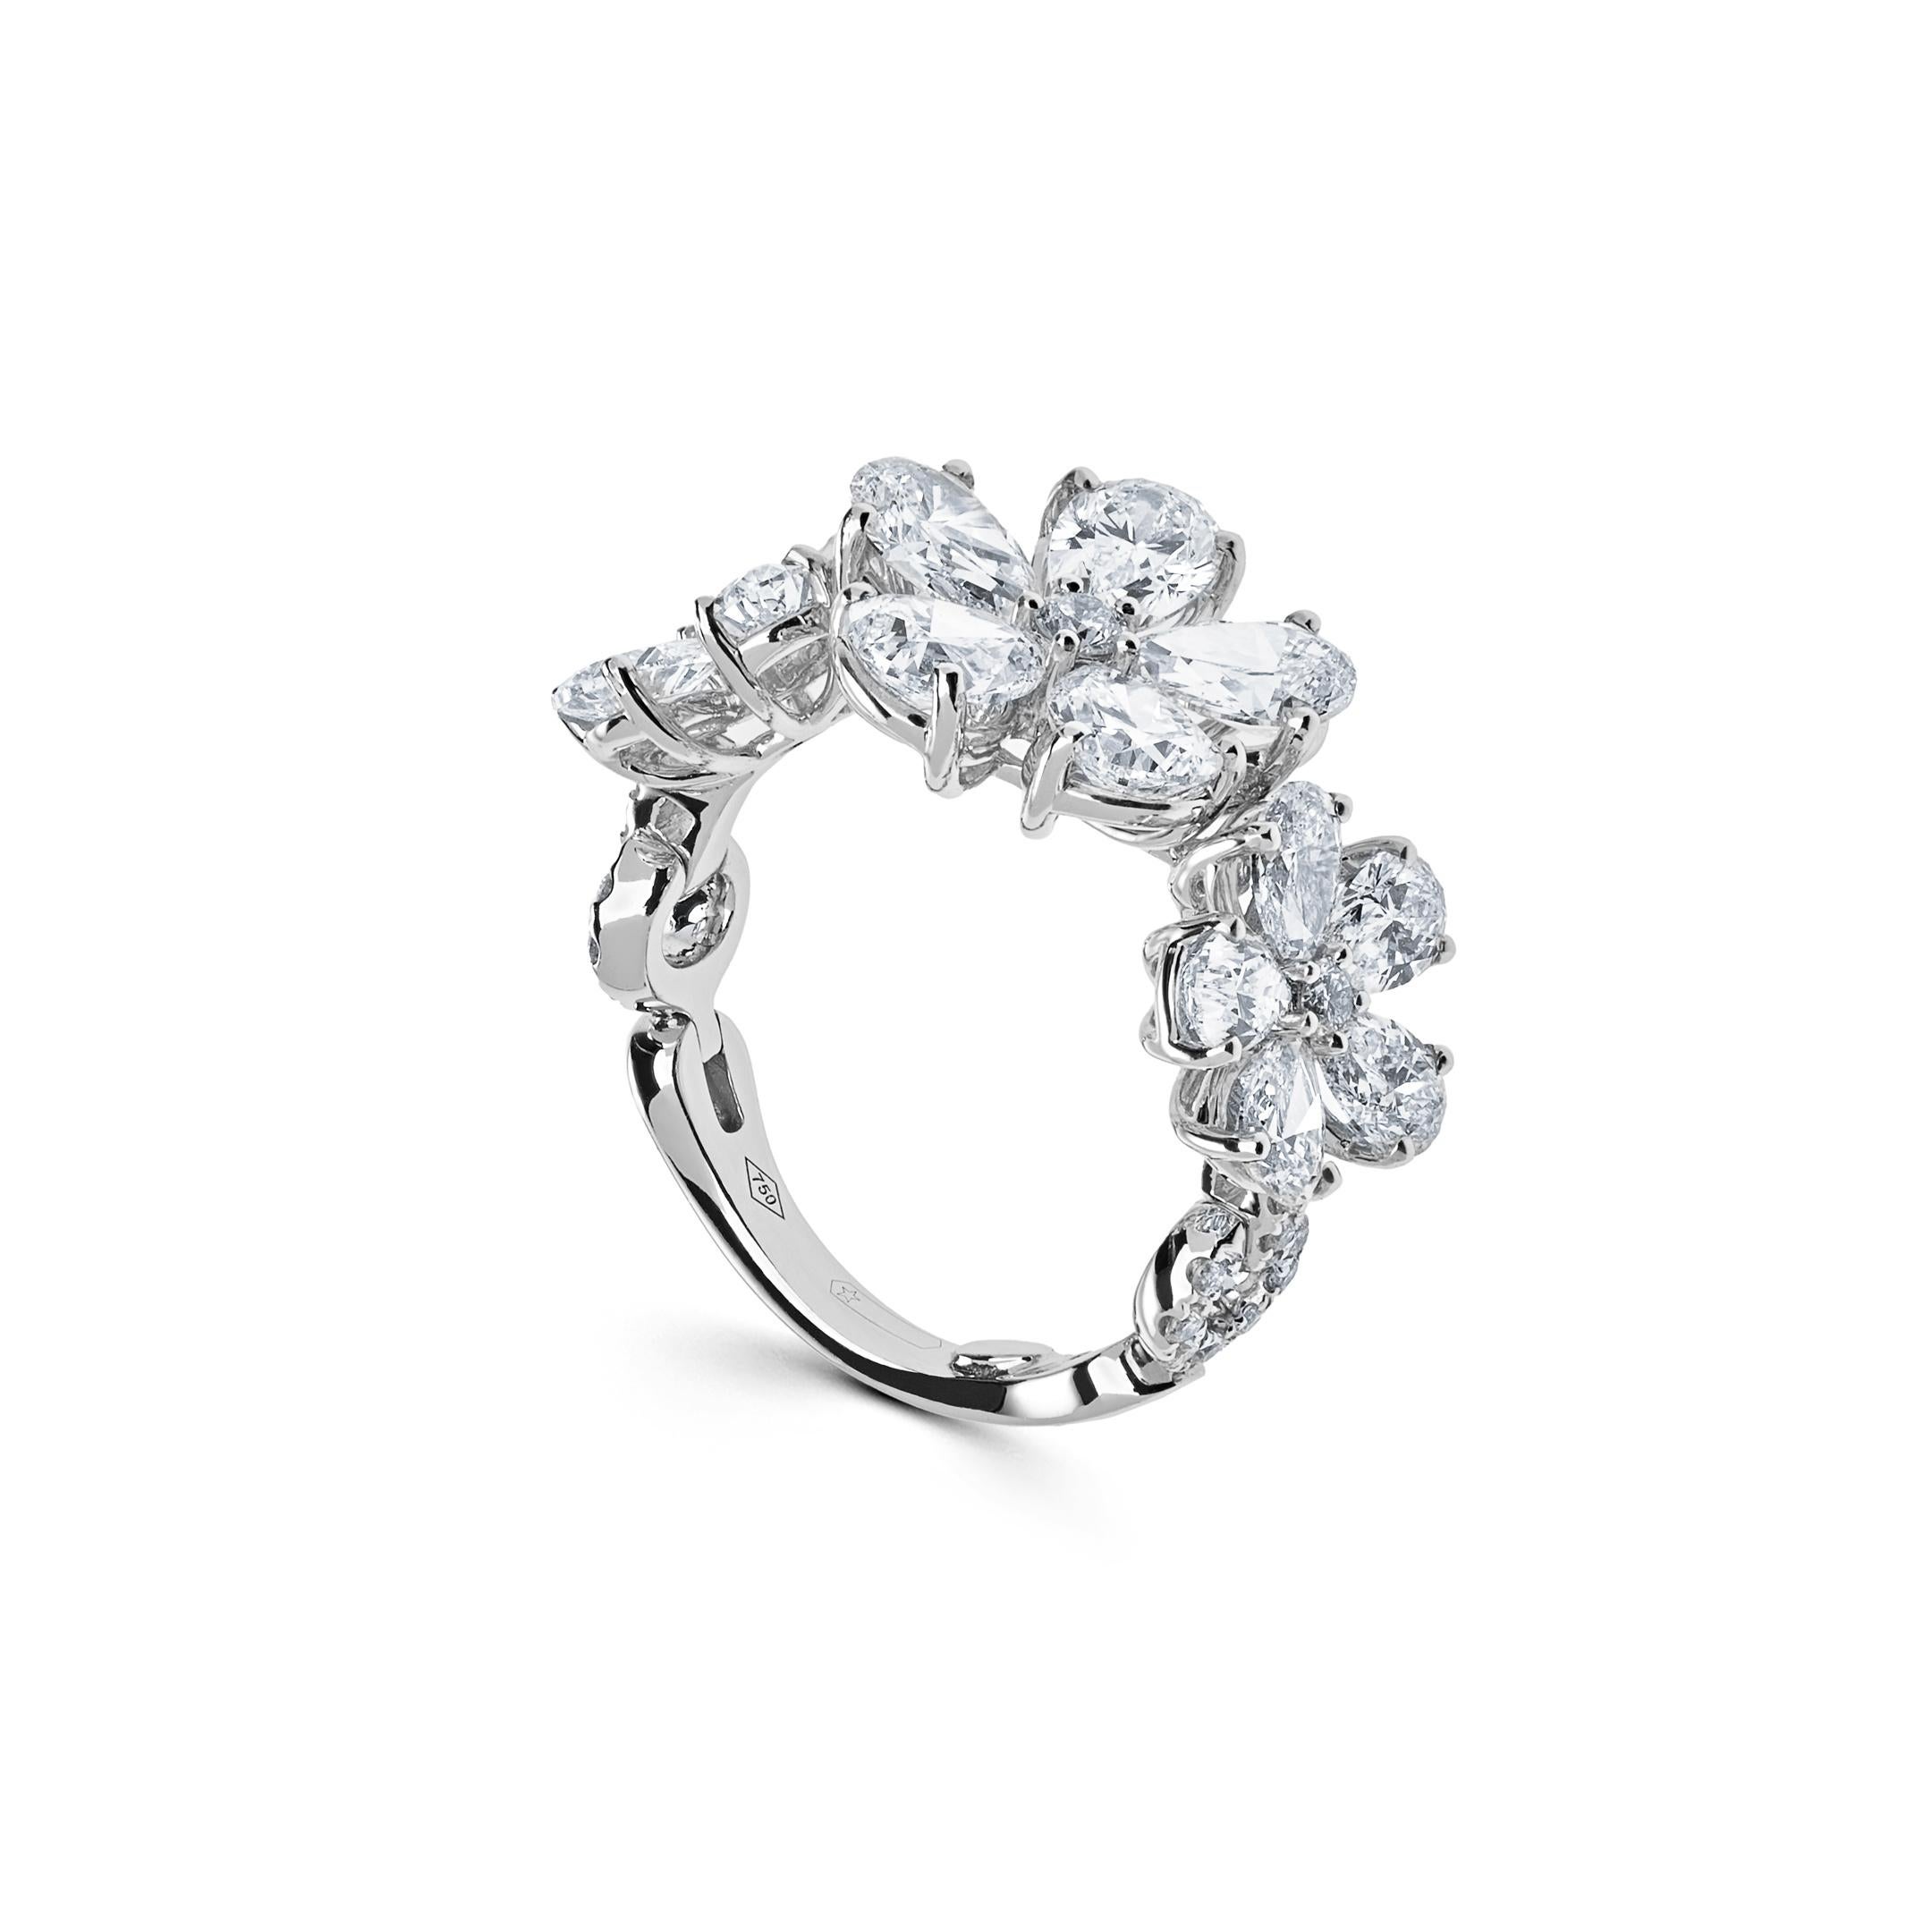 This stunning White Gold Diamond Flower Ring, cast in lustrous white gold, radiates elegance and sophistication with its intricate floral design. Embellished with a total of 23 round-cut diamonds, totaling 0.31 carats, and adorned with exquisite